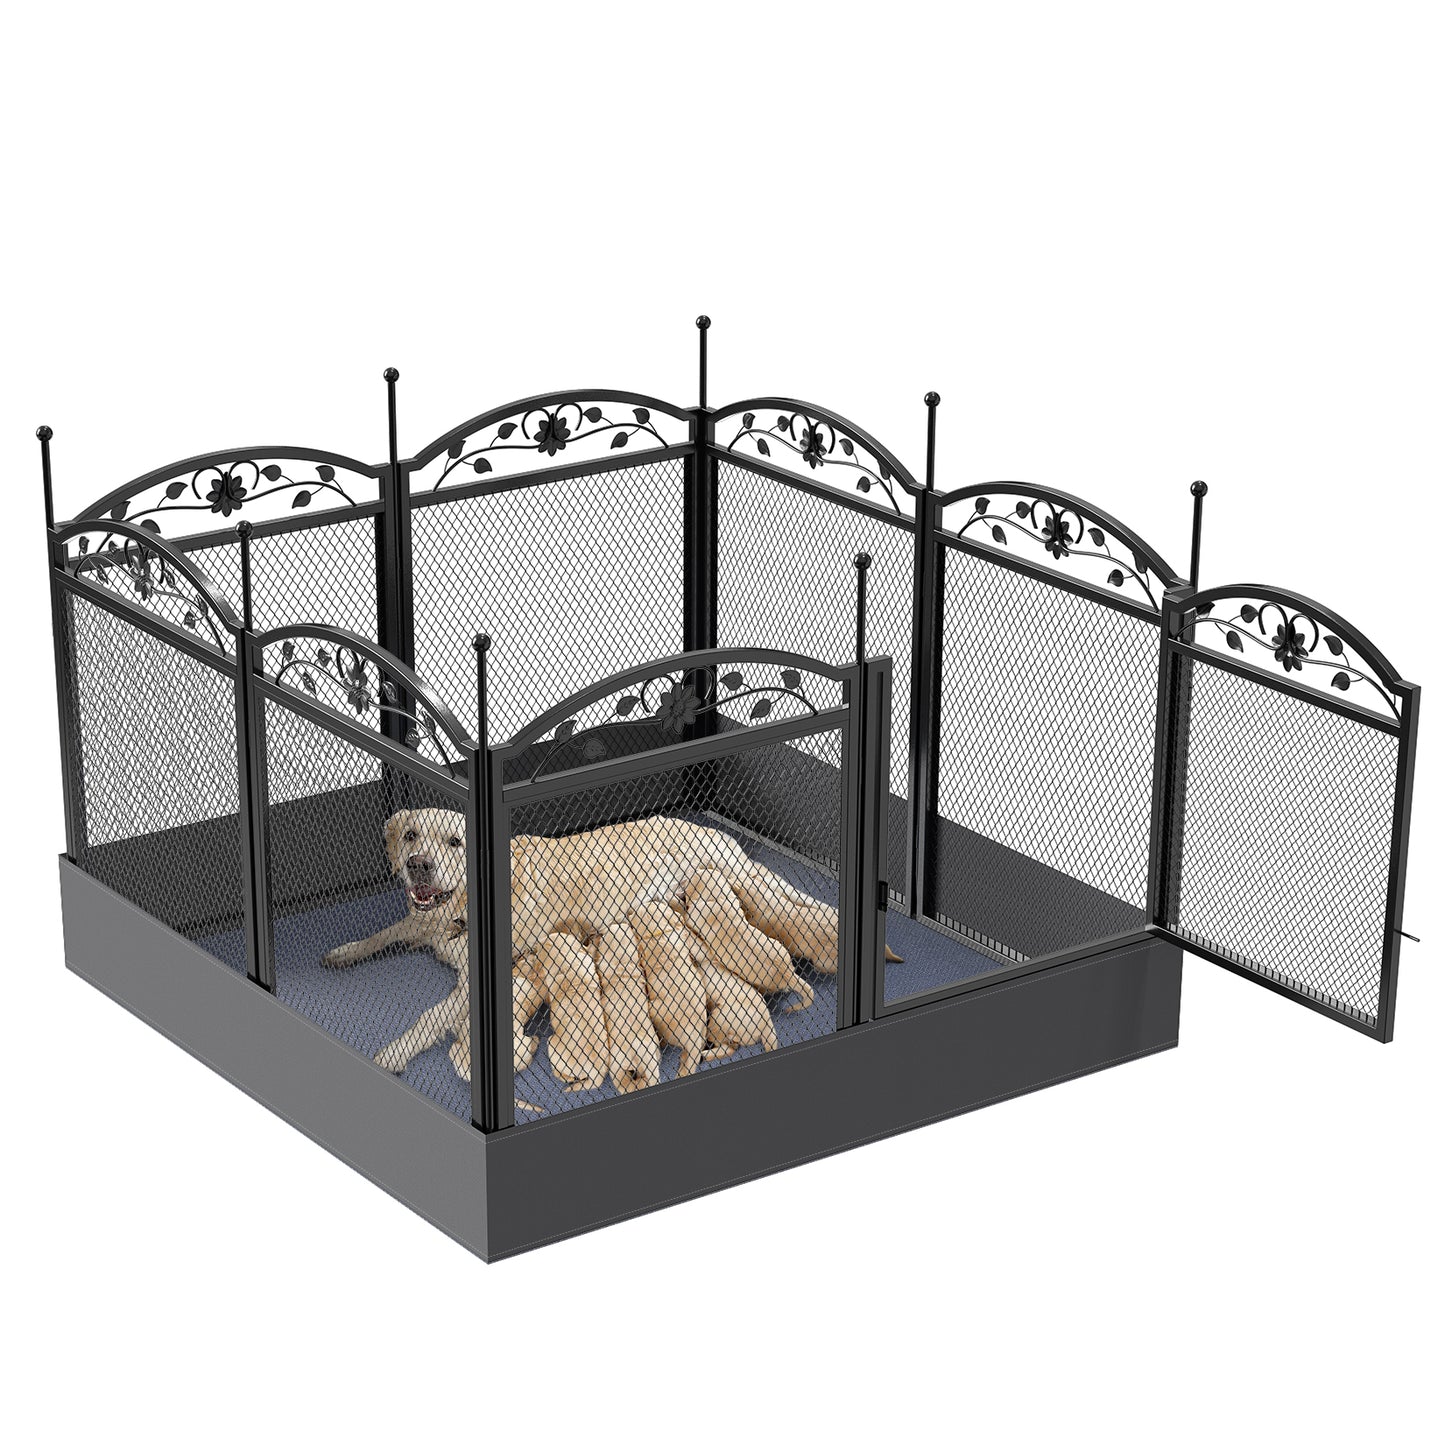 Heavy duty metal playpen, also can be a dog crate, dog fence for yard. The pen is see-through so your dogs can still see you and reduce their anxiety. Also giving your puppies room to explore and play safely. Very useful when you need train your puppies or you are busy around the house. 